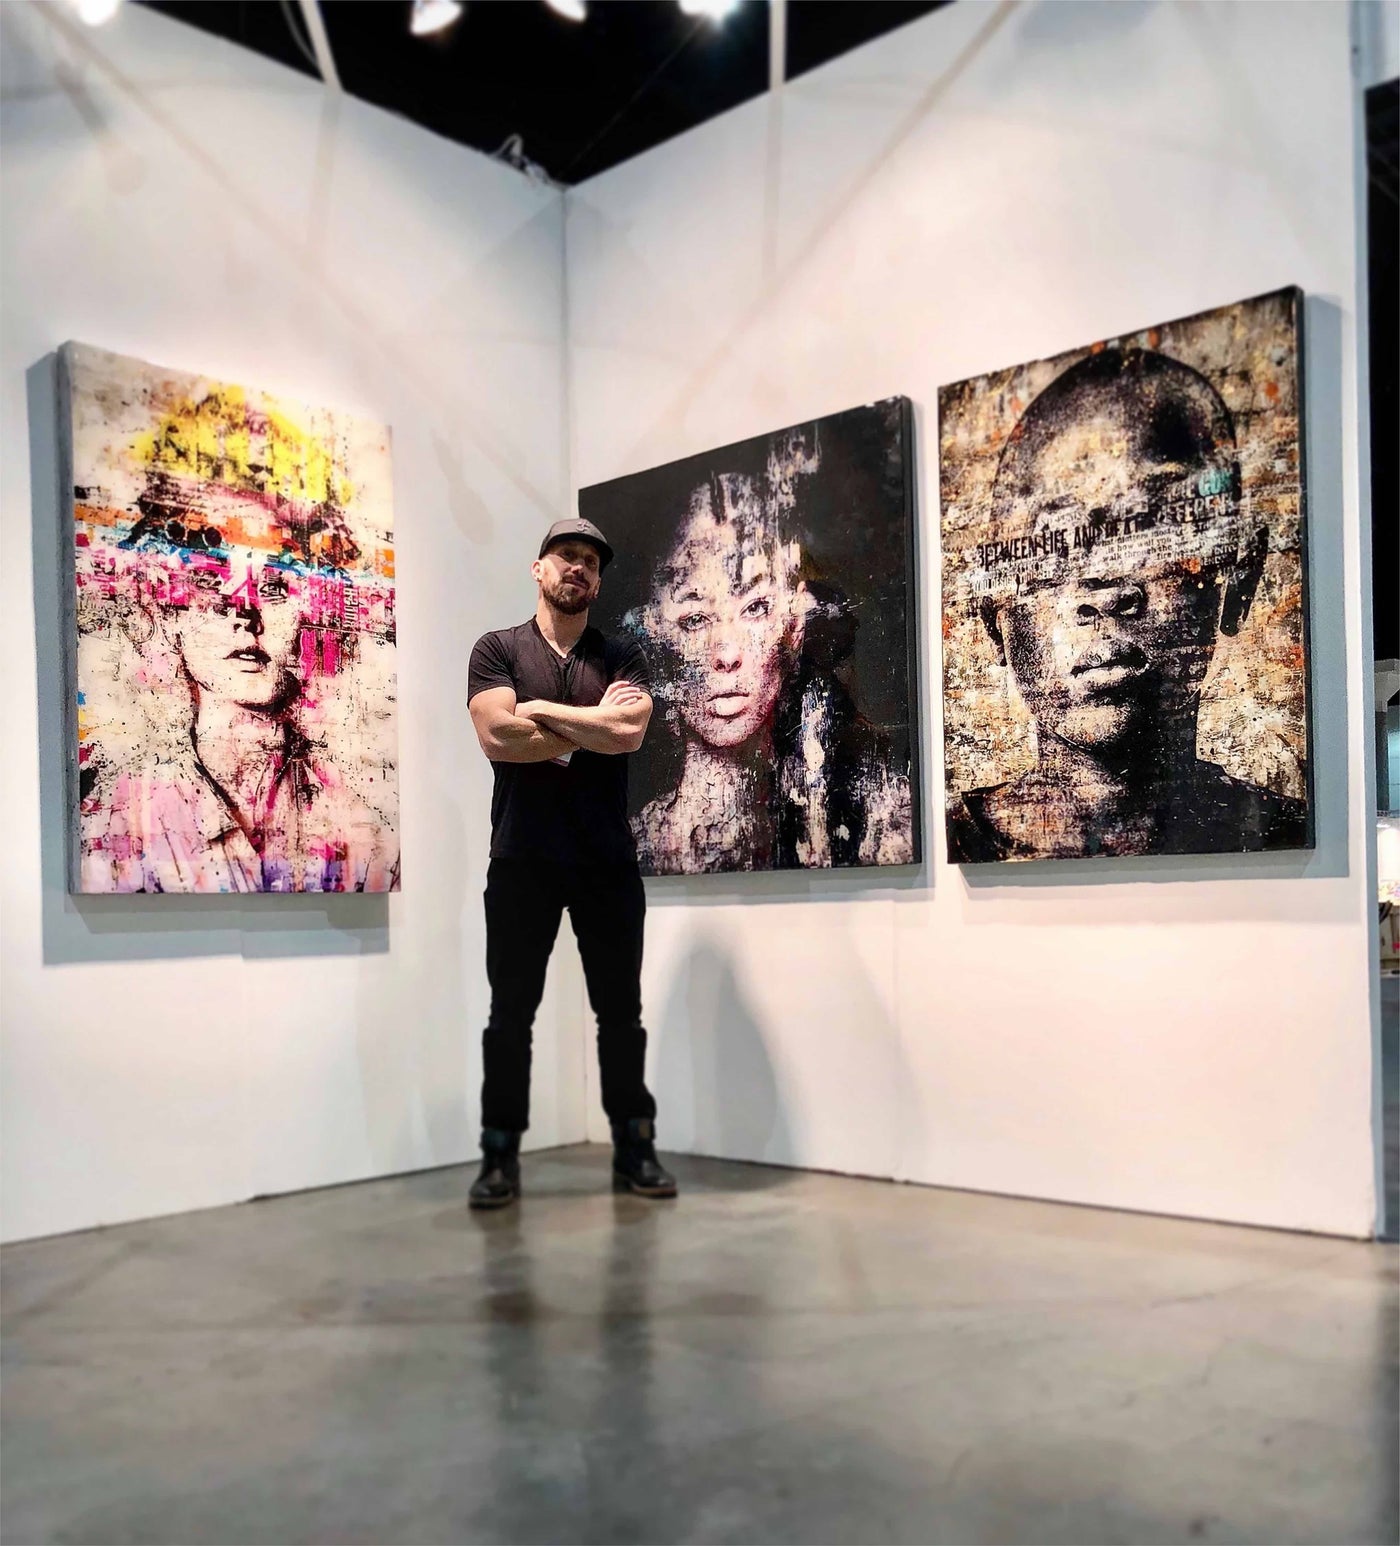 Markus Sebastiano of the Blochaus Art Gallery, standing in front of his artwork. He is the inspiration for the card, This is a hug-hug, the real thing, like you, which is part of the be well collection by beknown.